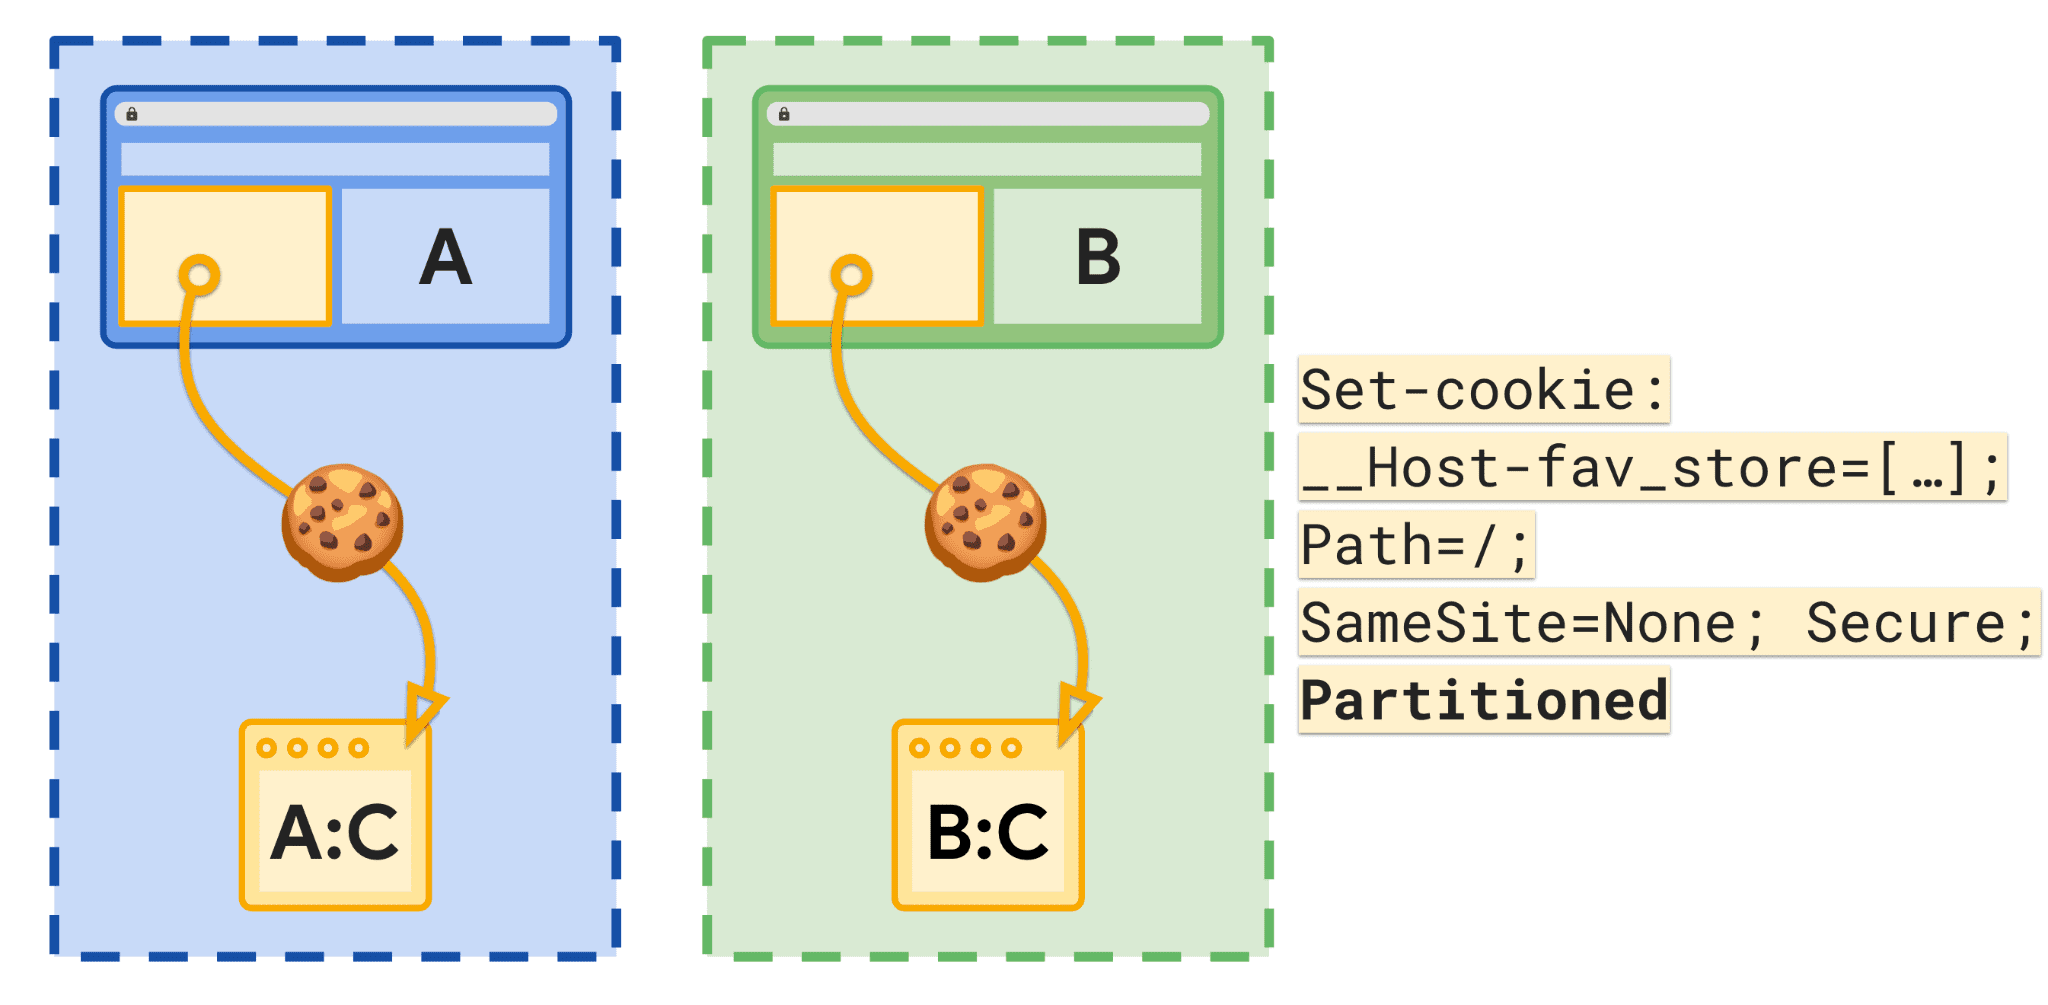 Diagram showing sites and paritioned storage with cookies.